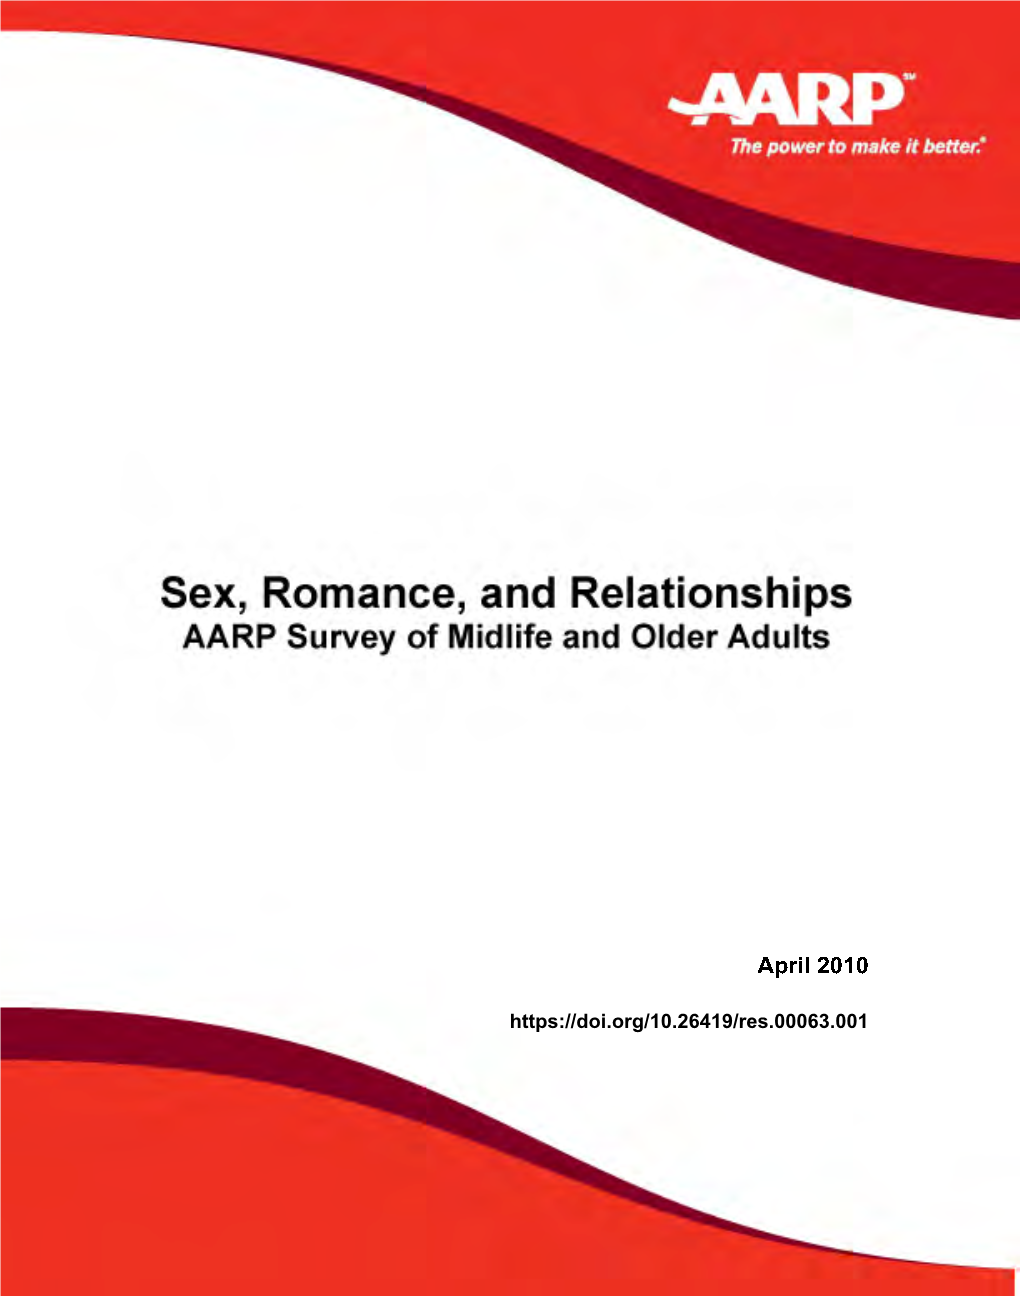 Sex, Romance, and Relationships: AARP Survey of Midlife and Older